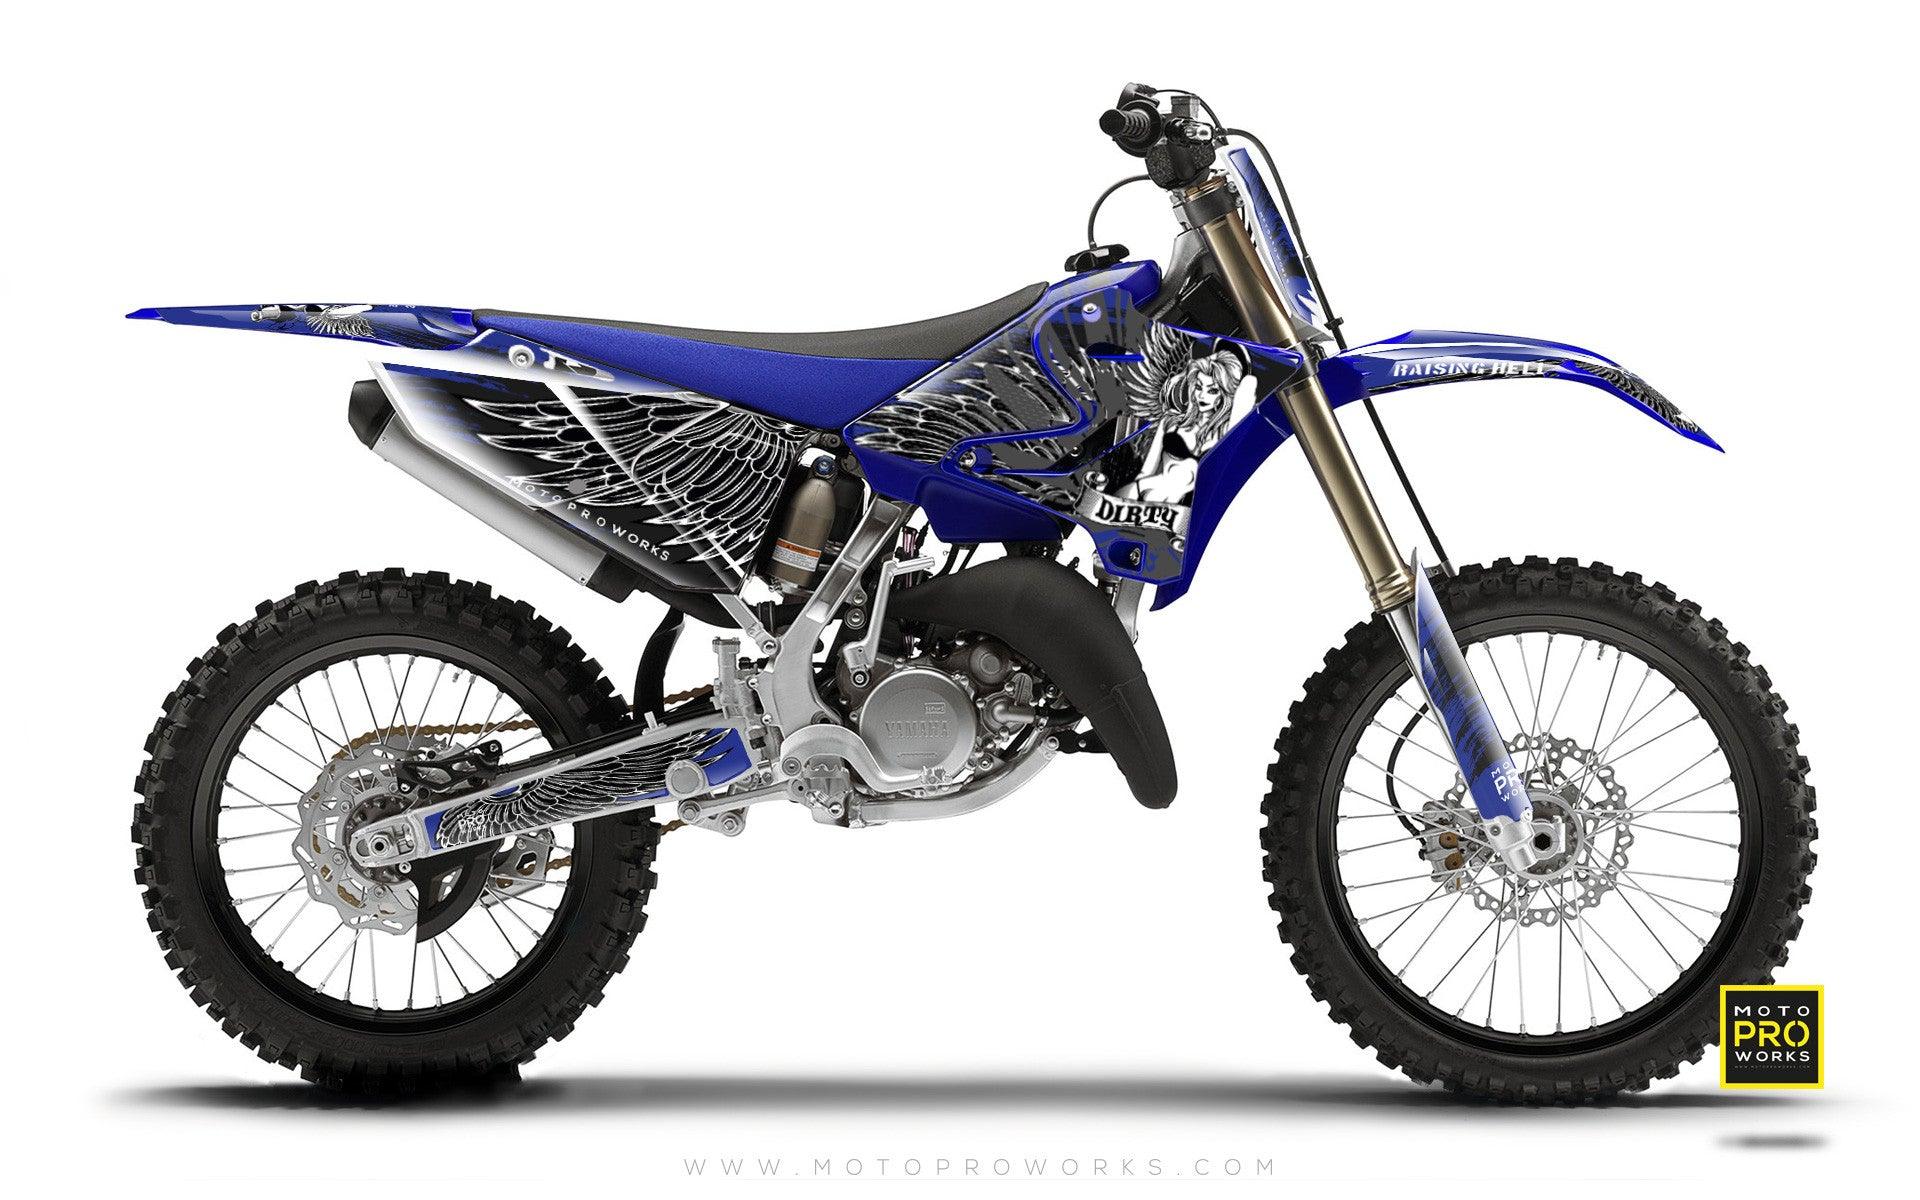 Yamaha GRAPHIC KIT - "Dirty Angel" (blue) - MotoProWorks | Decals and Bike Graphic kit